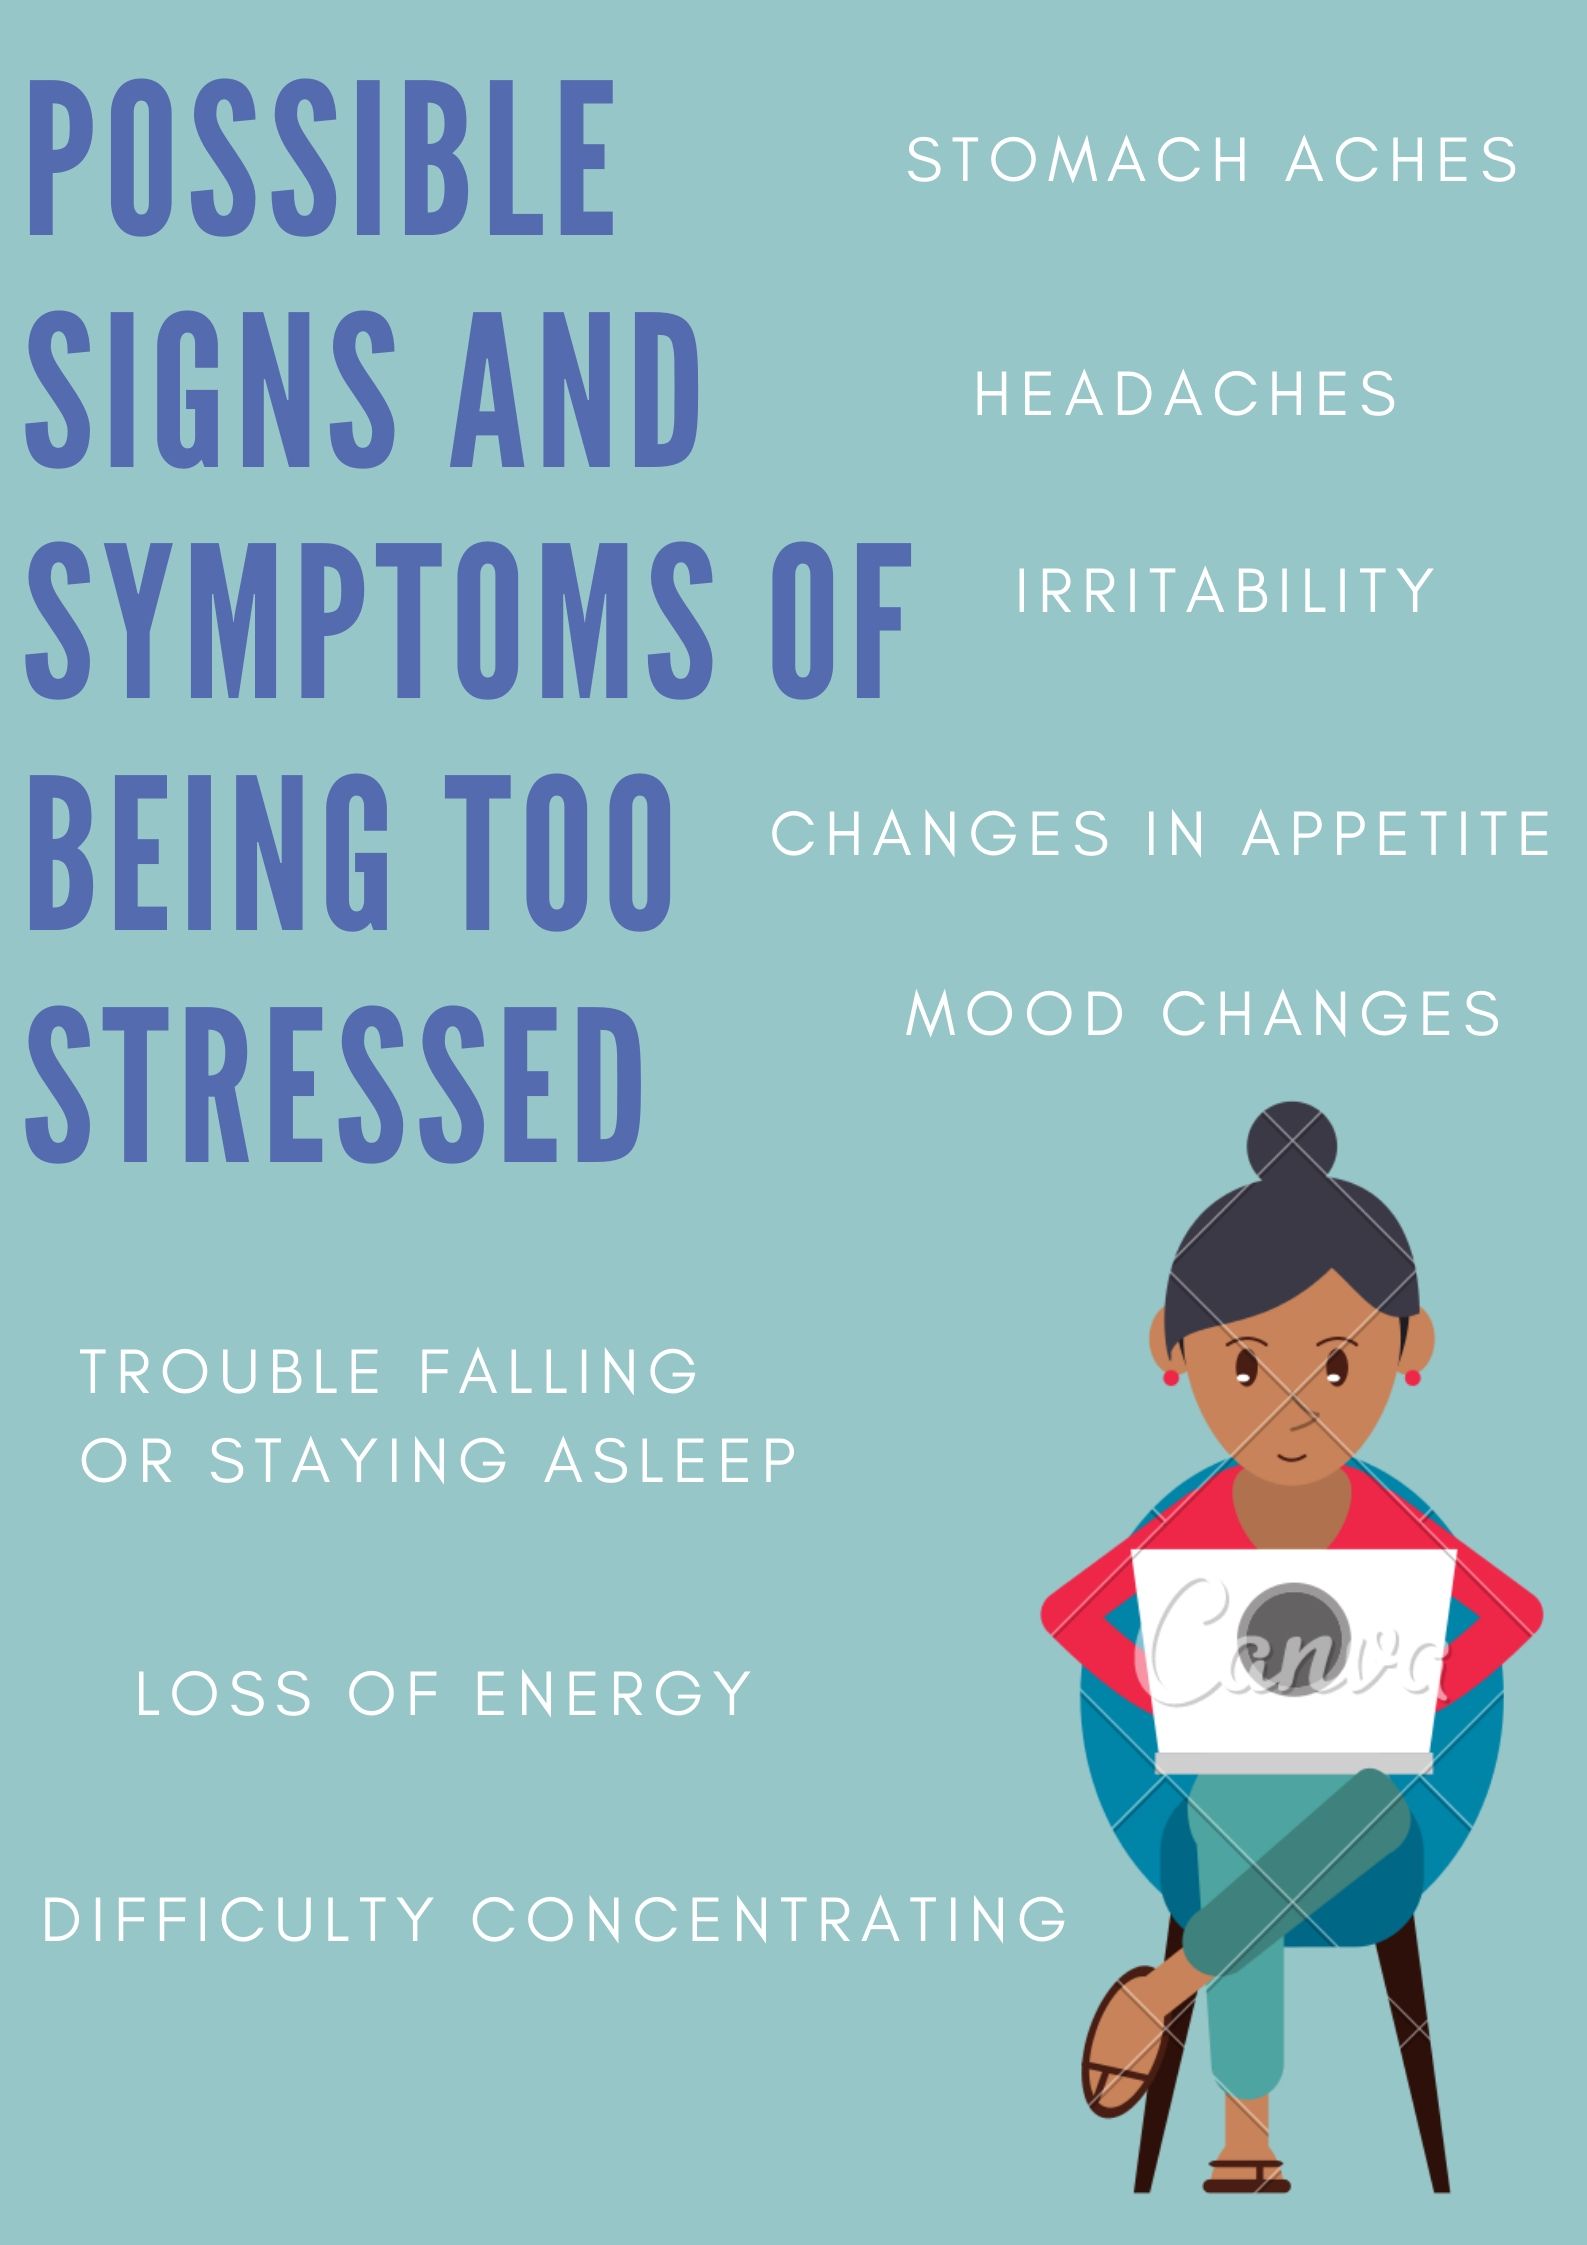 Signs and symptoms of stress: irritability, changes in appetite, stomach aches, headaches, mood changes, trouble sleeping, loss of energy, and difficulty concentrating